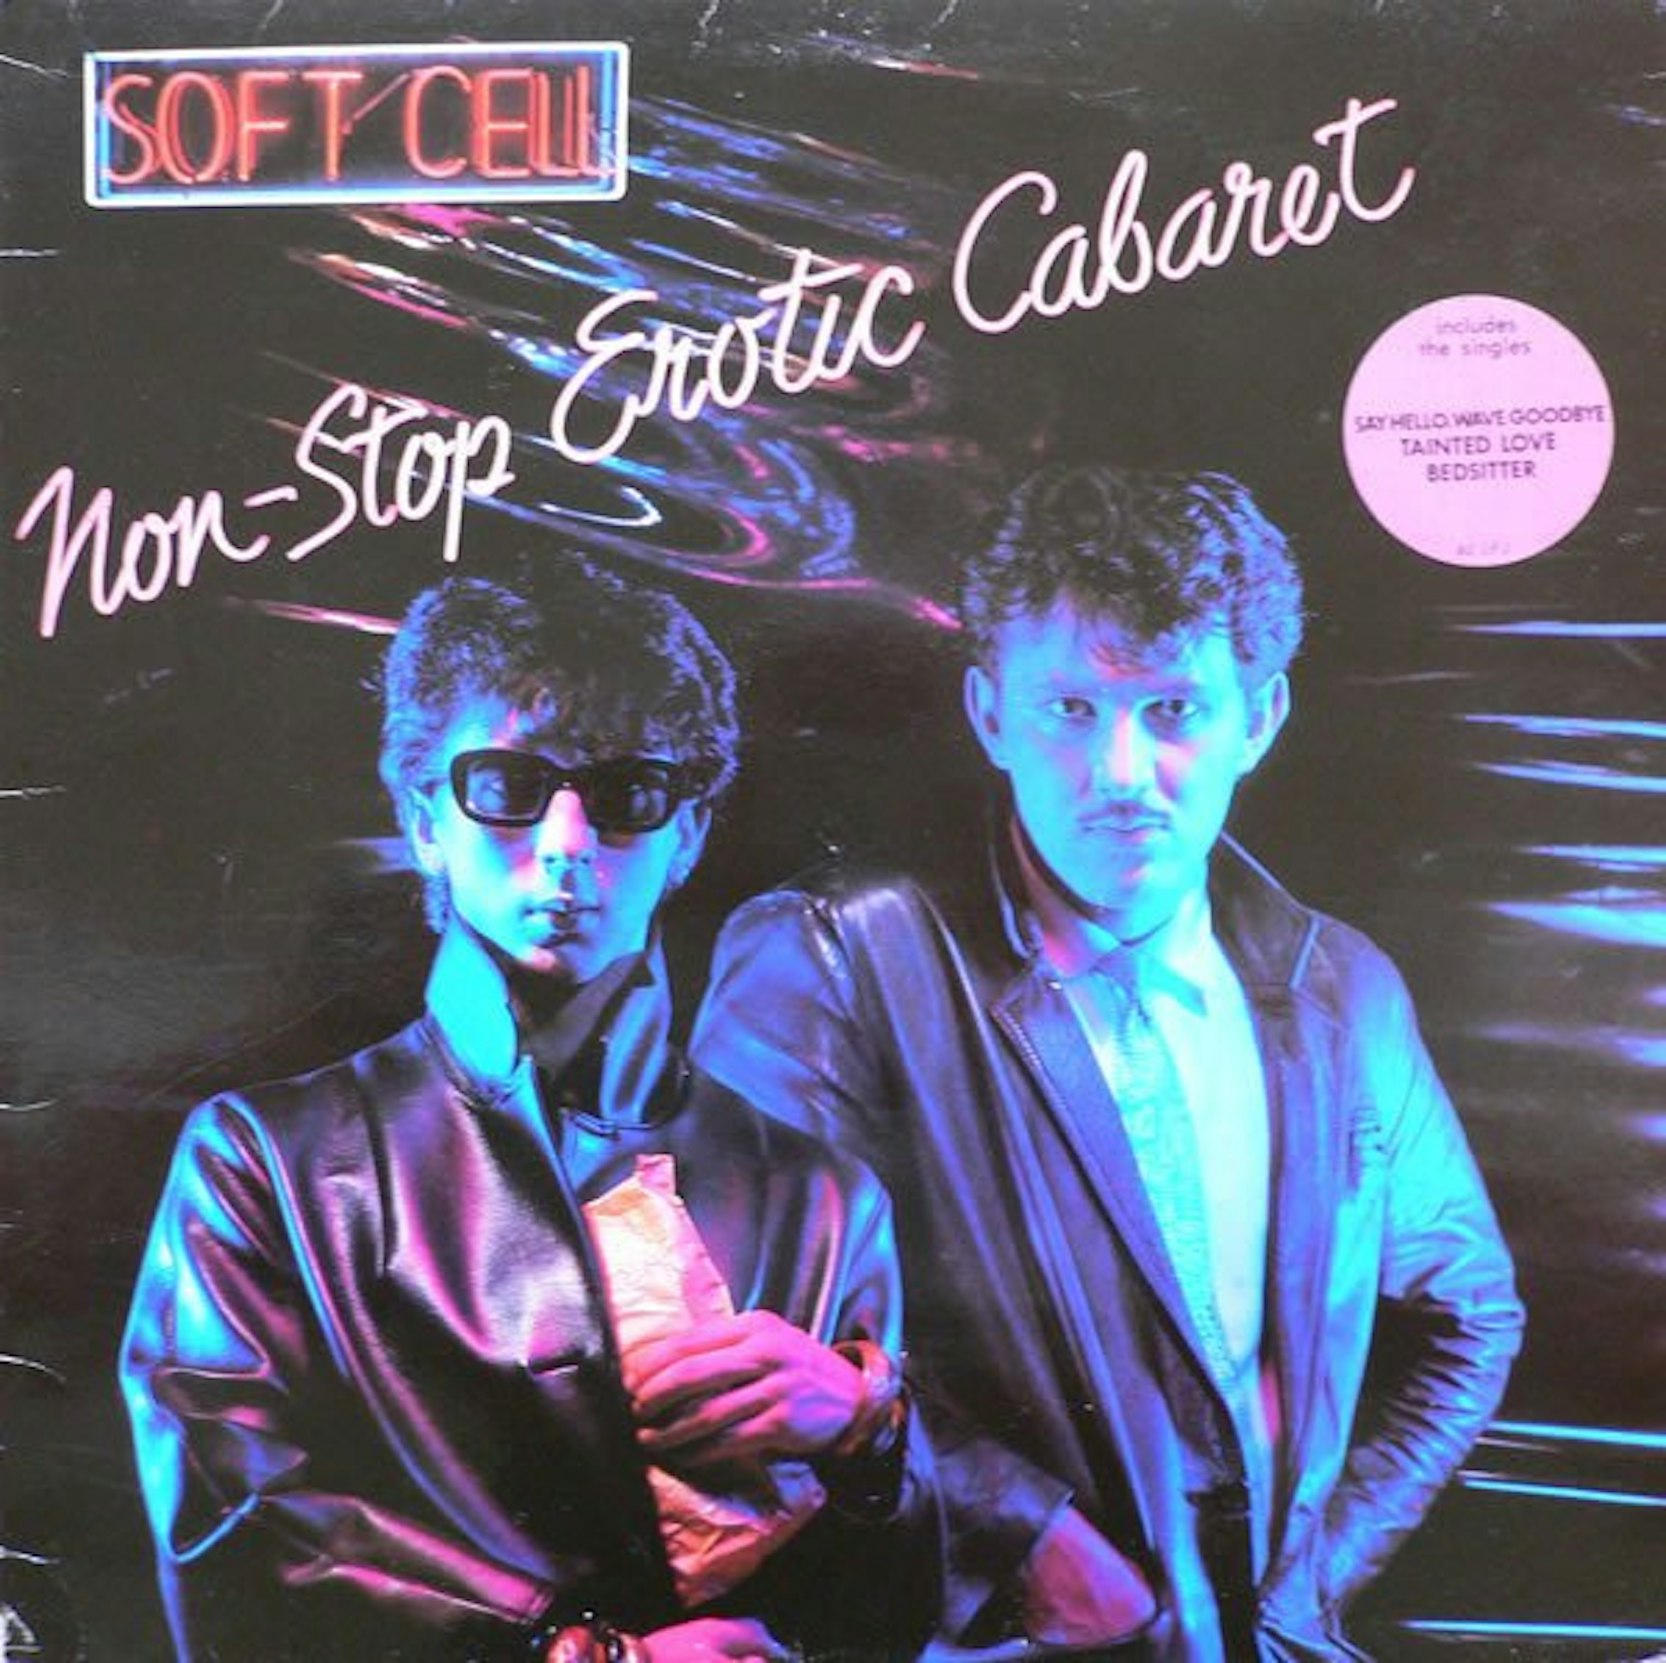 The 10 Best 80s Synth Pop Albums To Own On Vinyl — Vinyl Me Please